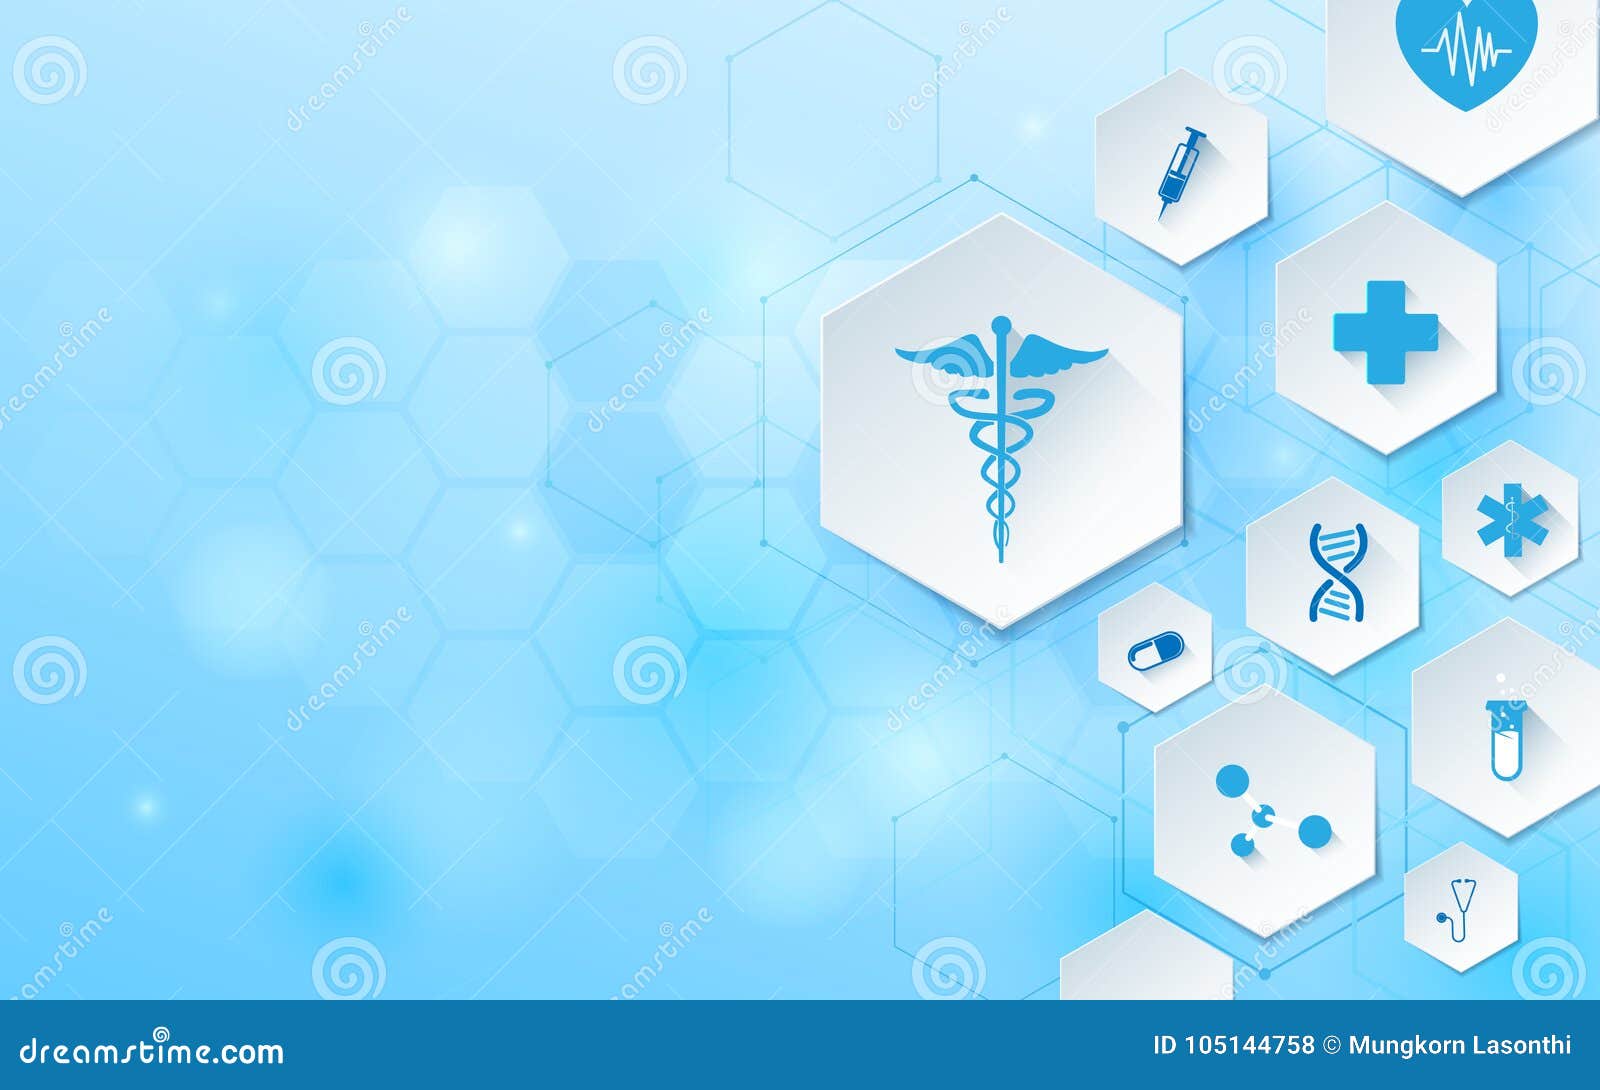 abstract geometric  medicine and science concept background